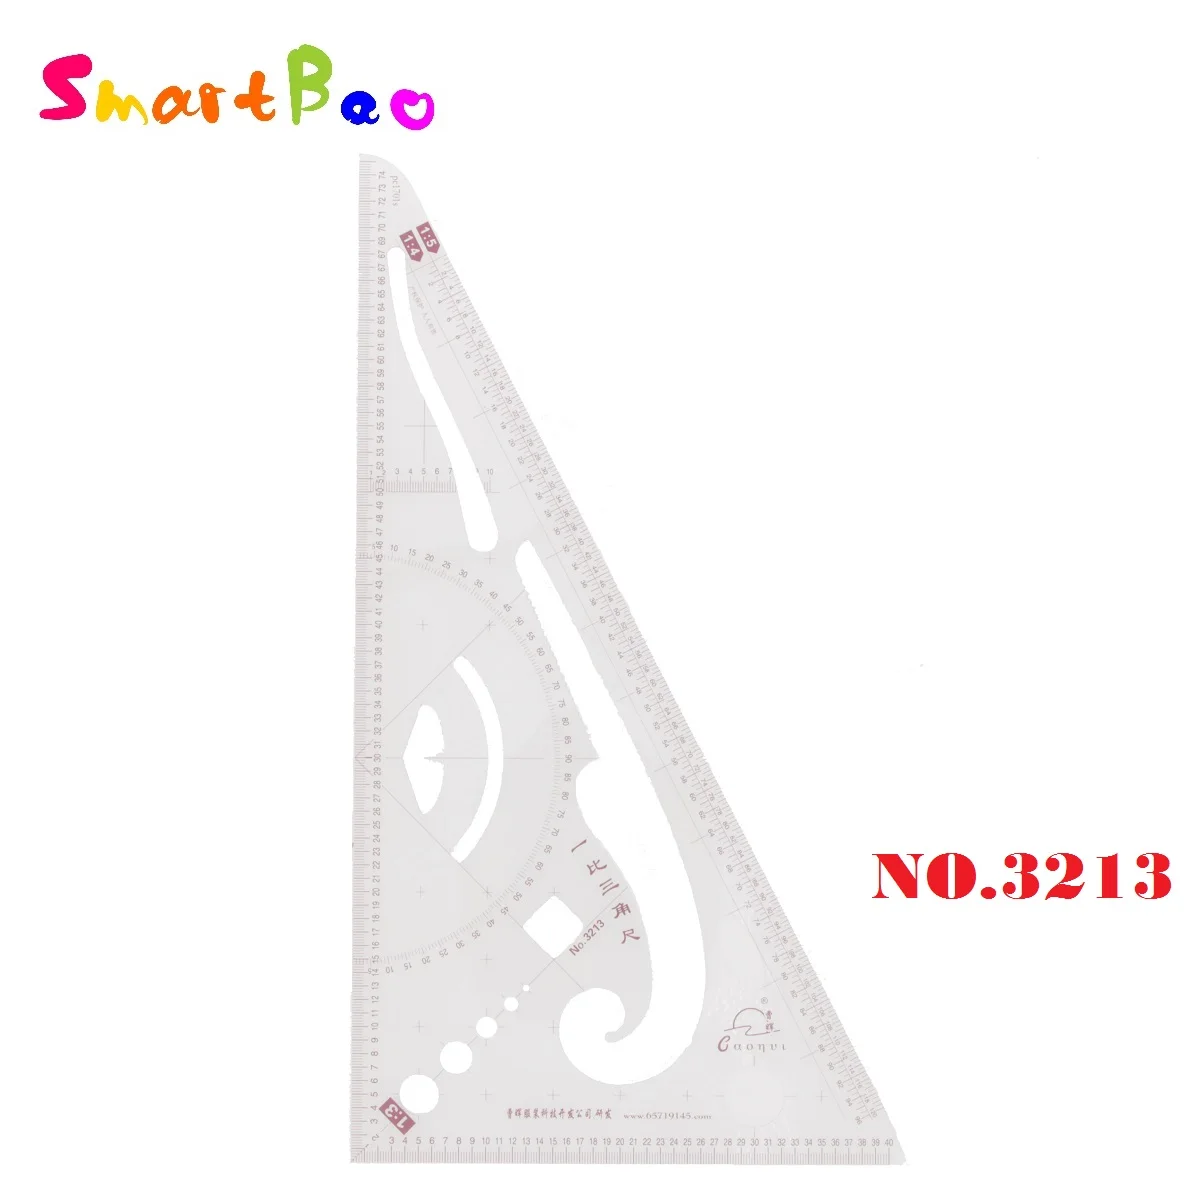 1:3 Scale Triangular Ruler Patchwork Ruler Clothes Measure Rulers Design metal patchwork rulers for fashion design metric system sewing curve ruler garment rulers for patchwork cutting ruler